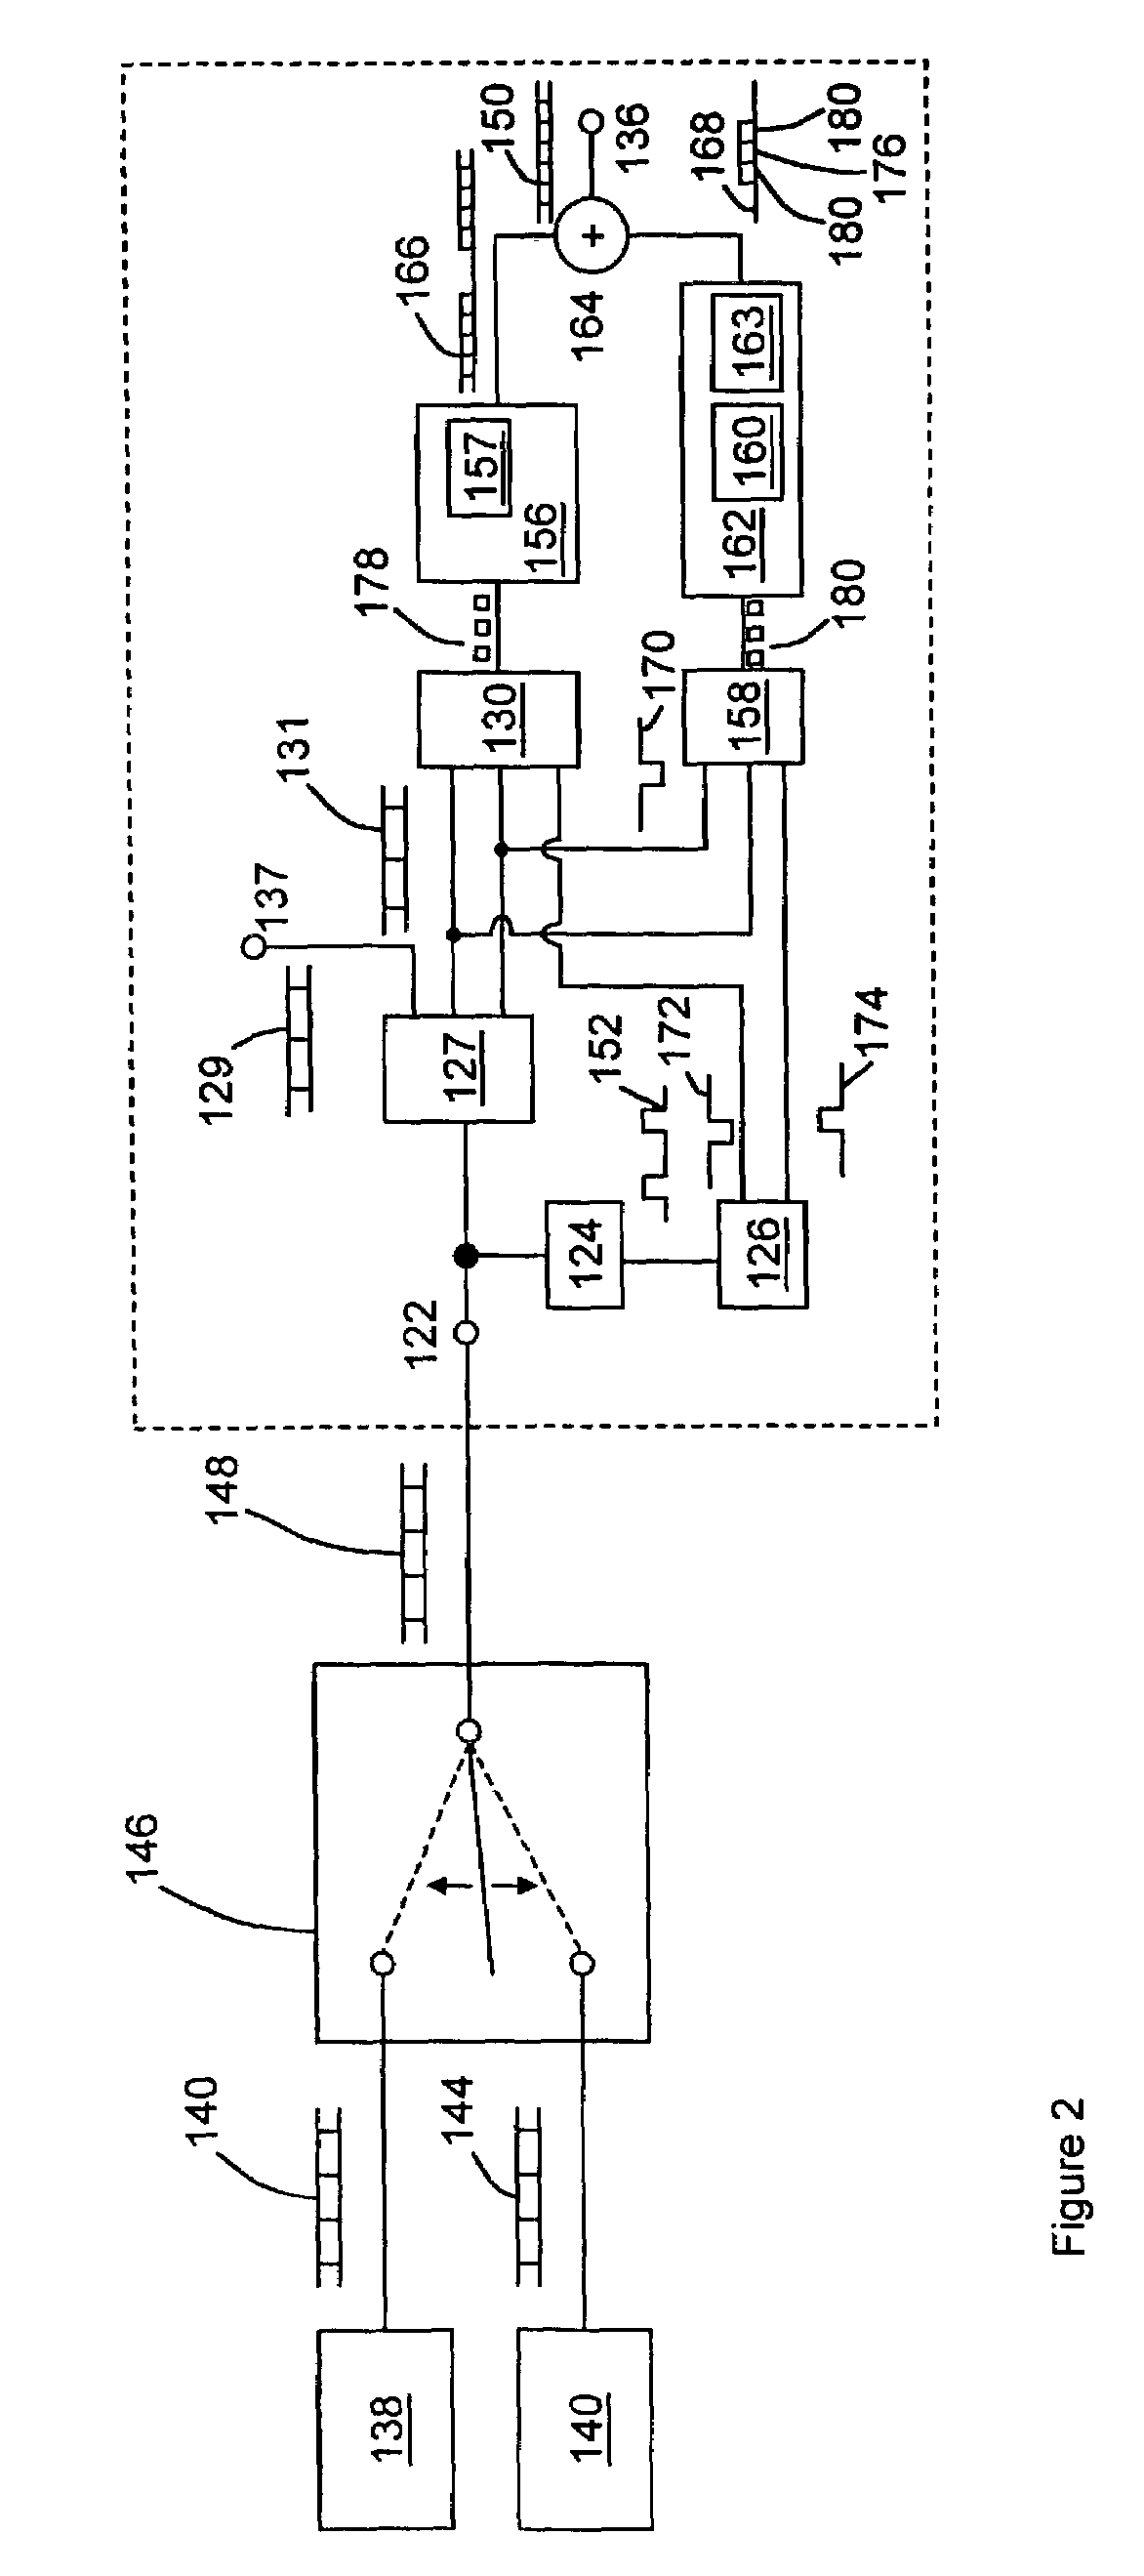 Circuit and method for live switching of digital video programs containing embedded audio data